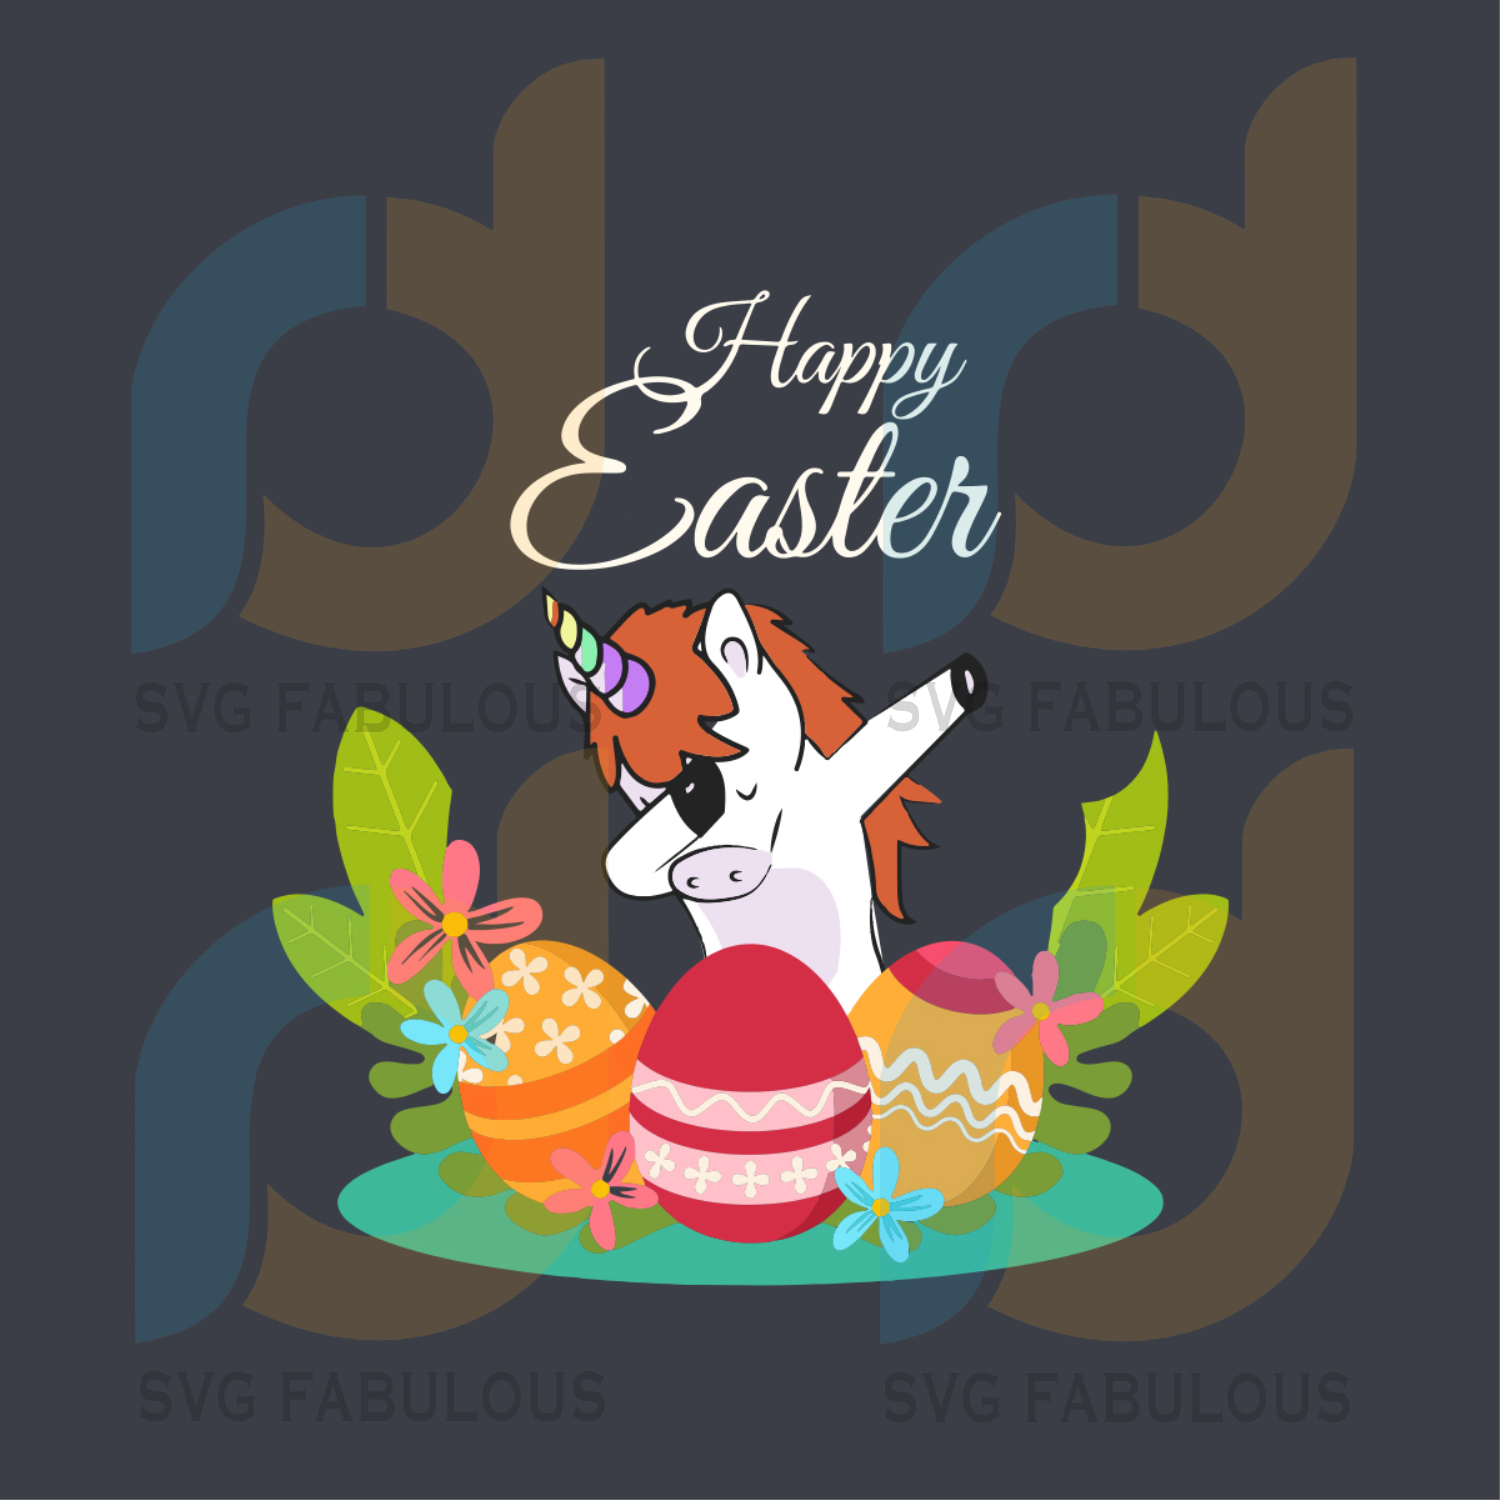 Download Dabbing Unicorn Happy Easter Day Svg Easter Day Svg Easter Unicorn S Svg Fabulous